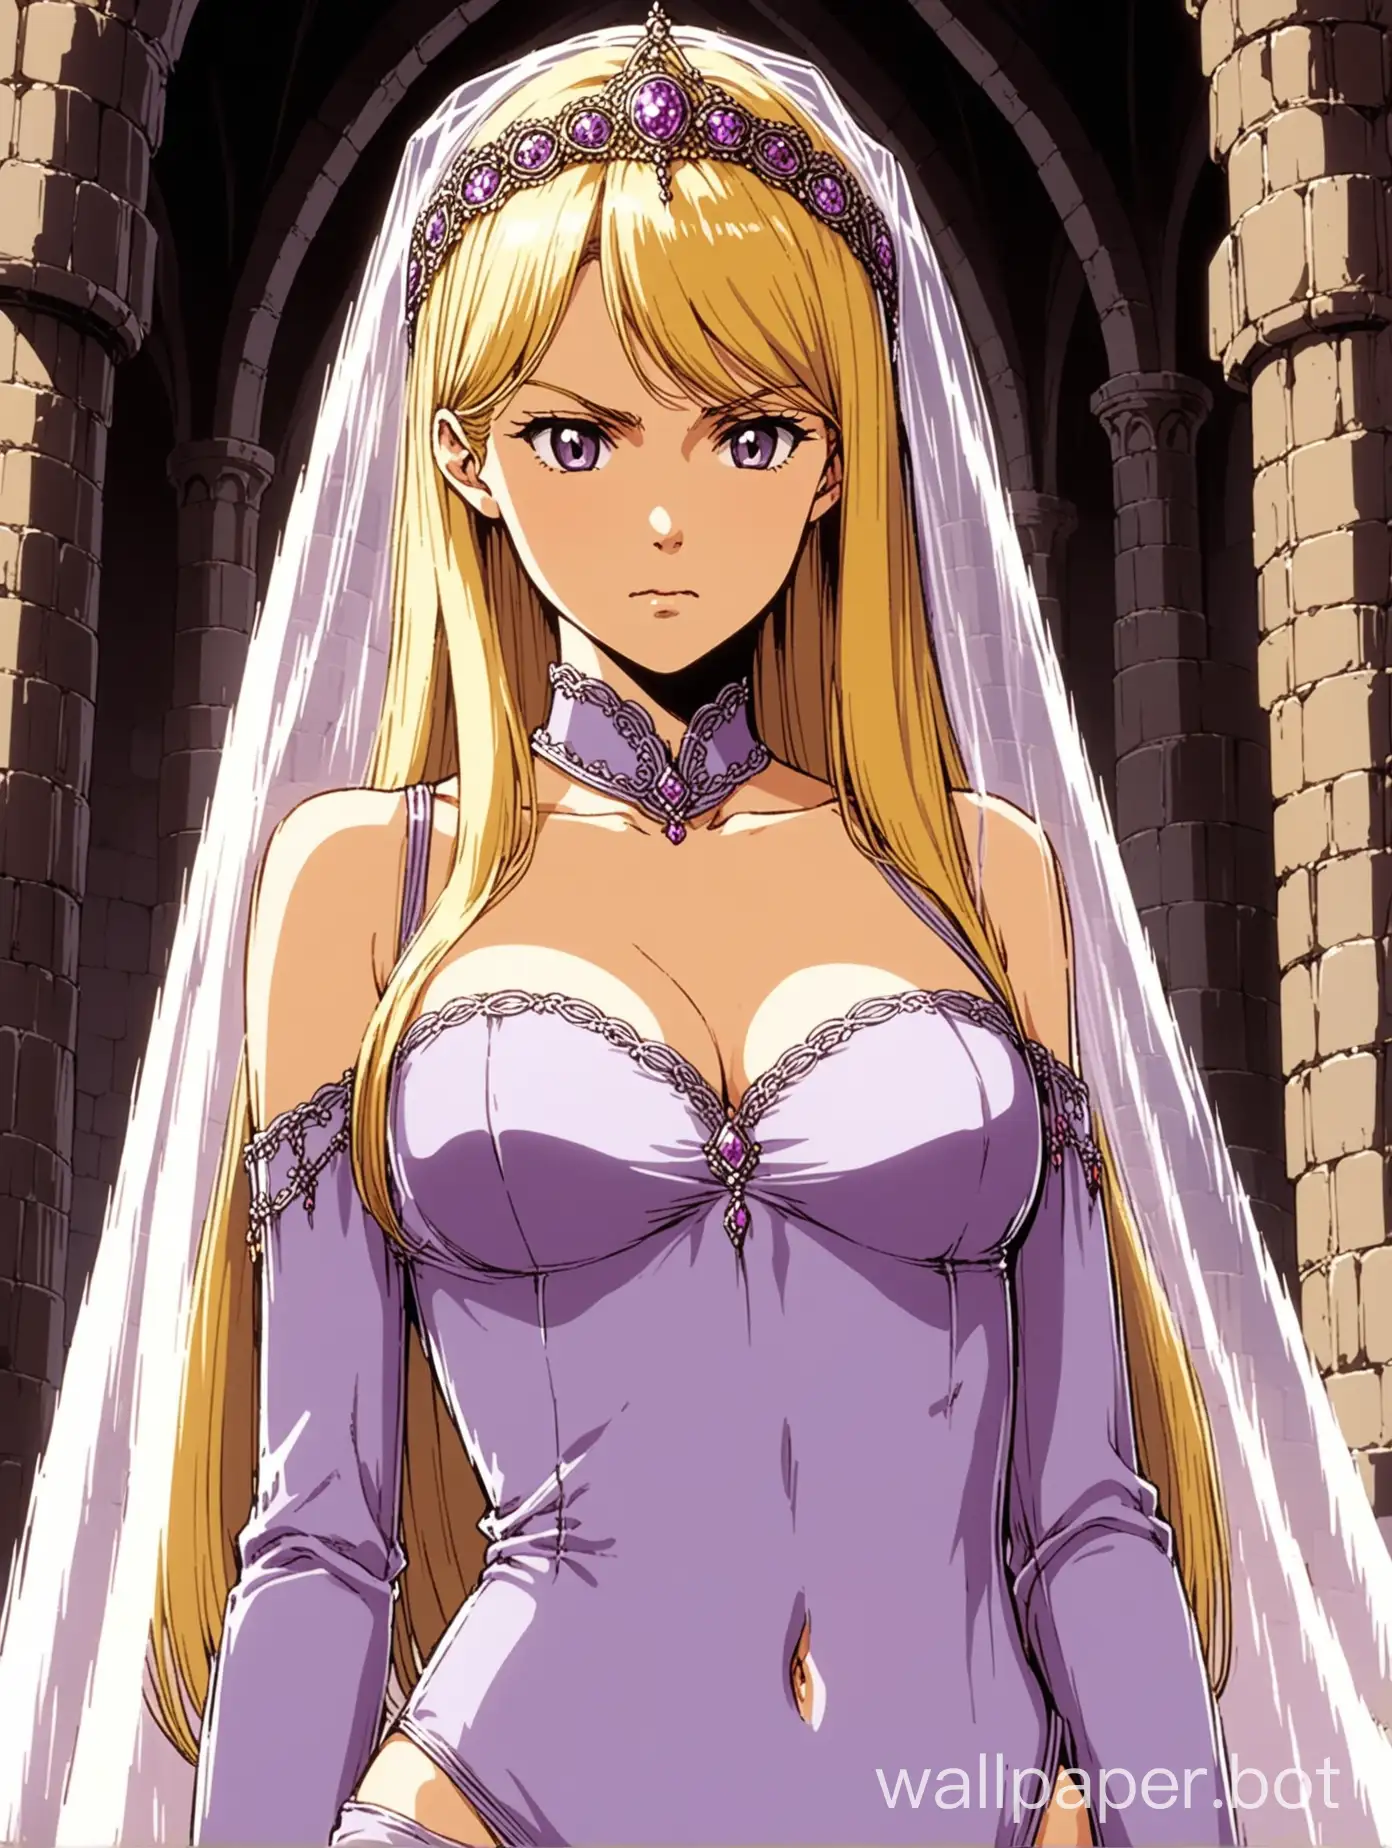 a beautiful young blonde woman, she is thin and elegant, youthful face, bitter facial expression, scowling, slender elegance, wearing an open shirt, she is wearing a skintight thin translucent sleeveless lavender dress that is open down the front, cleavage, exposed chest, midriff, exposed navel, wearing an ornate headdress, lilac veil, golden-blonde hair that is parted in the middle, she is thin and skinny, 1980s retro anime, medieval elegance, castle interior